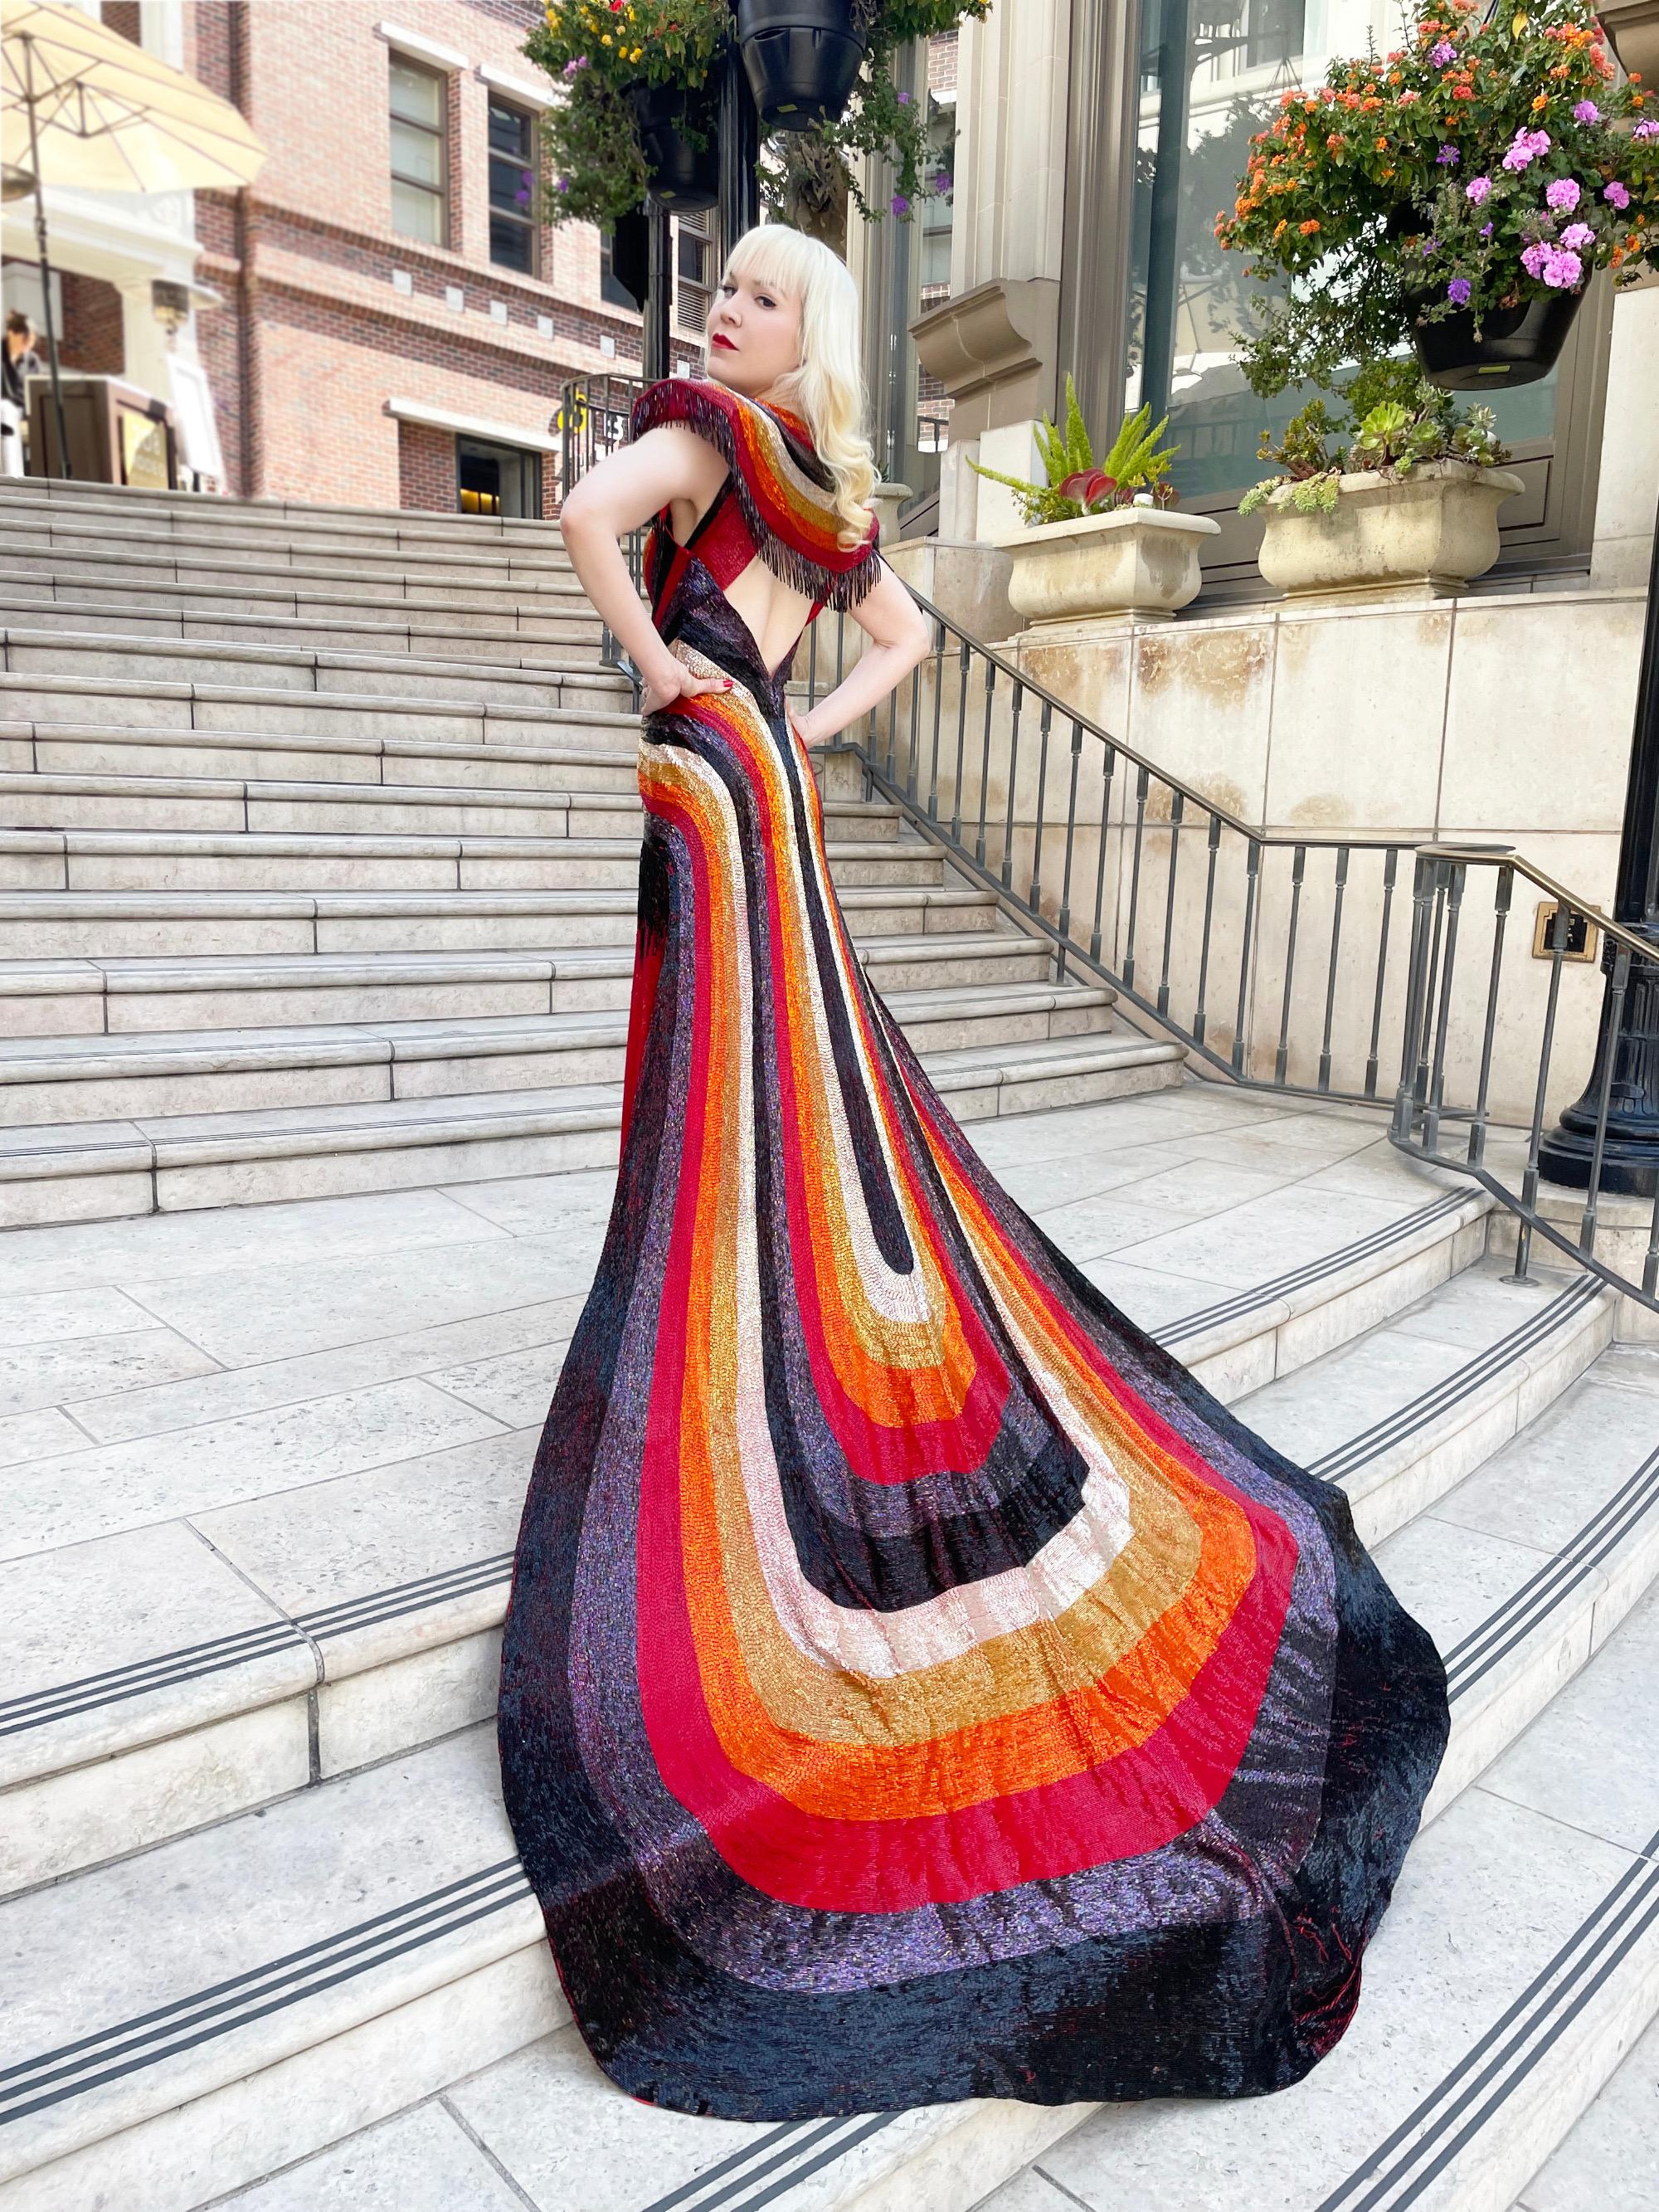 An unbelievable, museum worthy late 1970’s fully beaded hourglass trained glam rock custom couture gown ensemble by David Fernandez. Though not a household name, he is a beloved Puerto Rican fashion designer who is known for his complex beadwork and